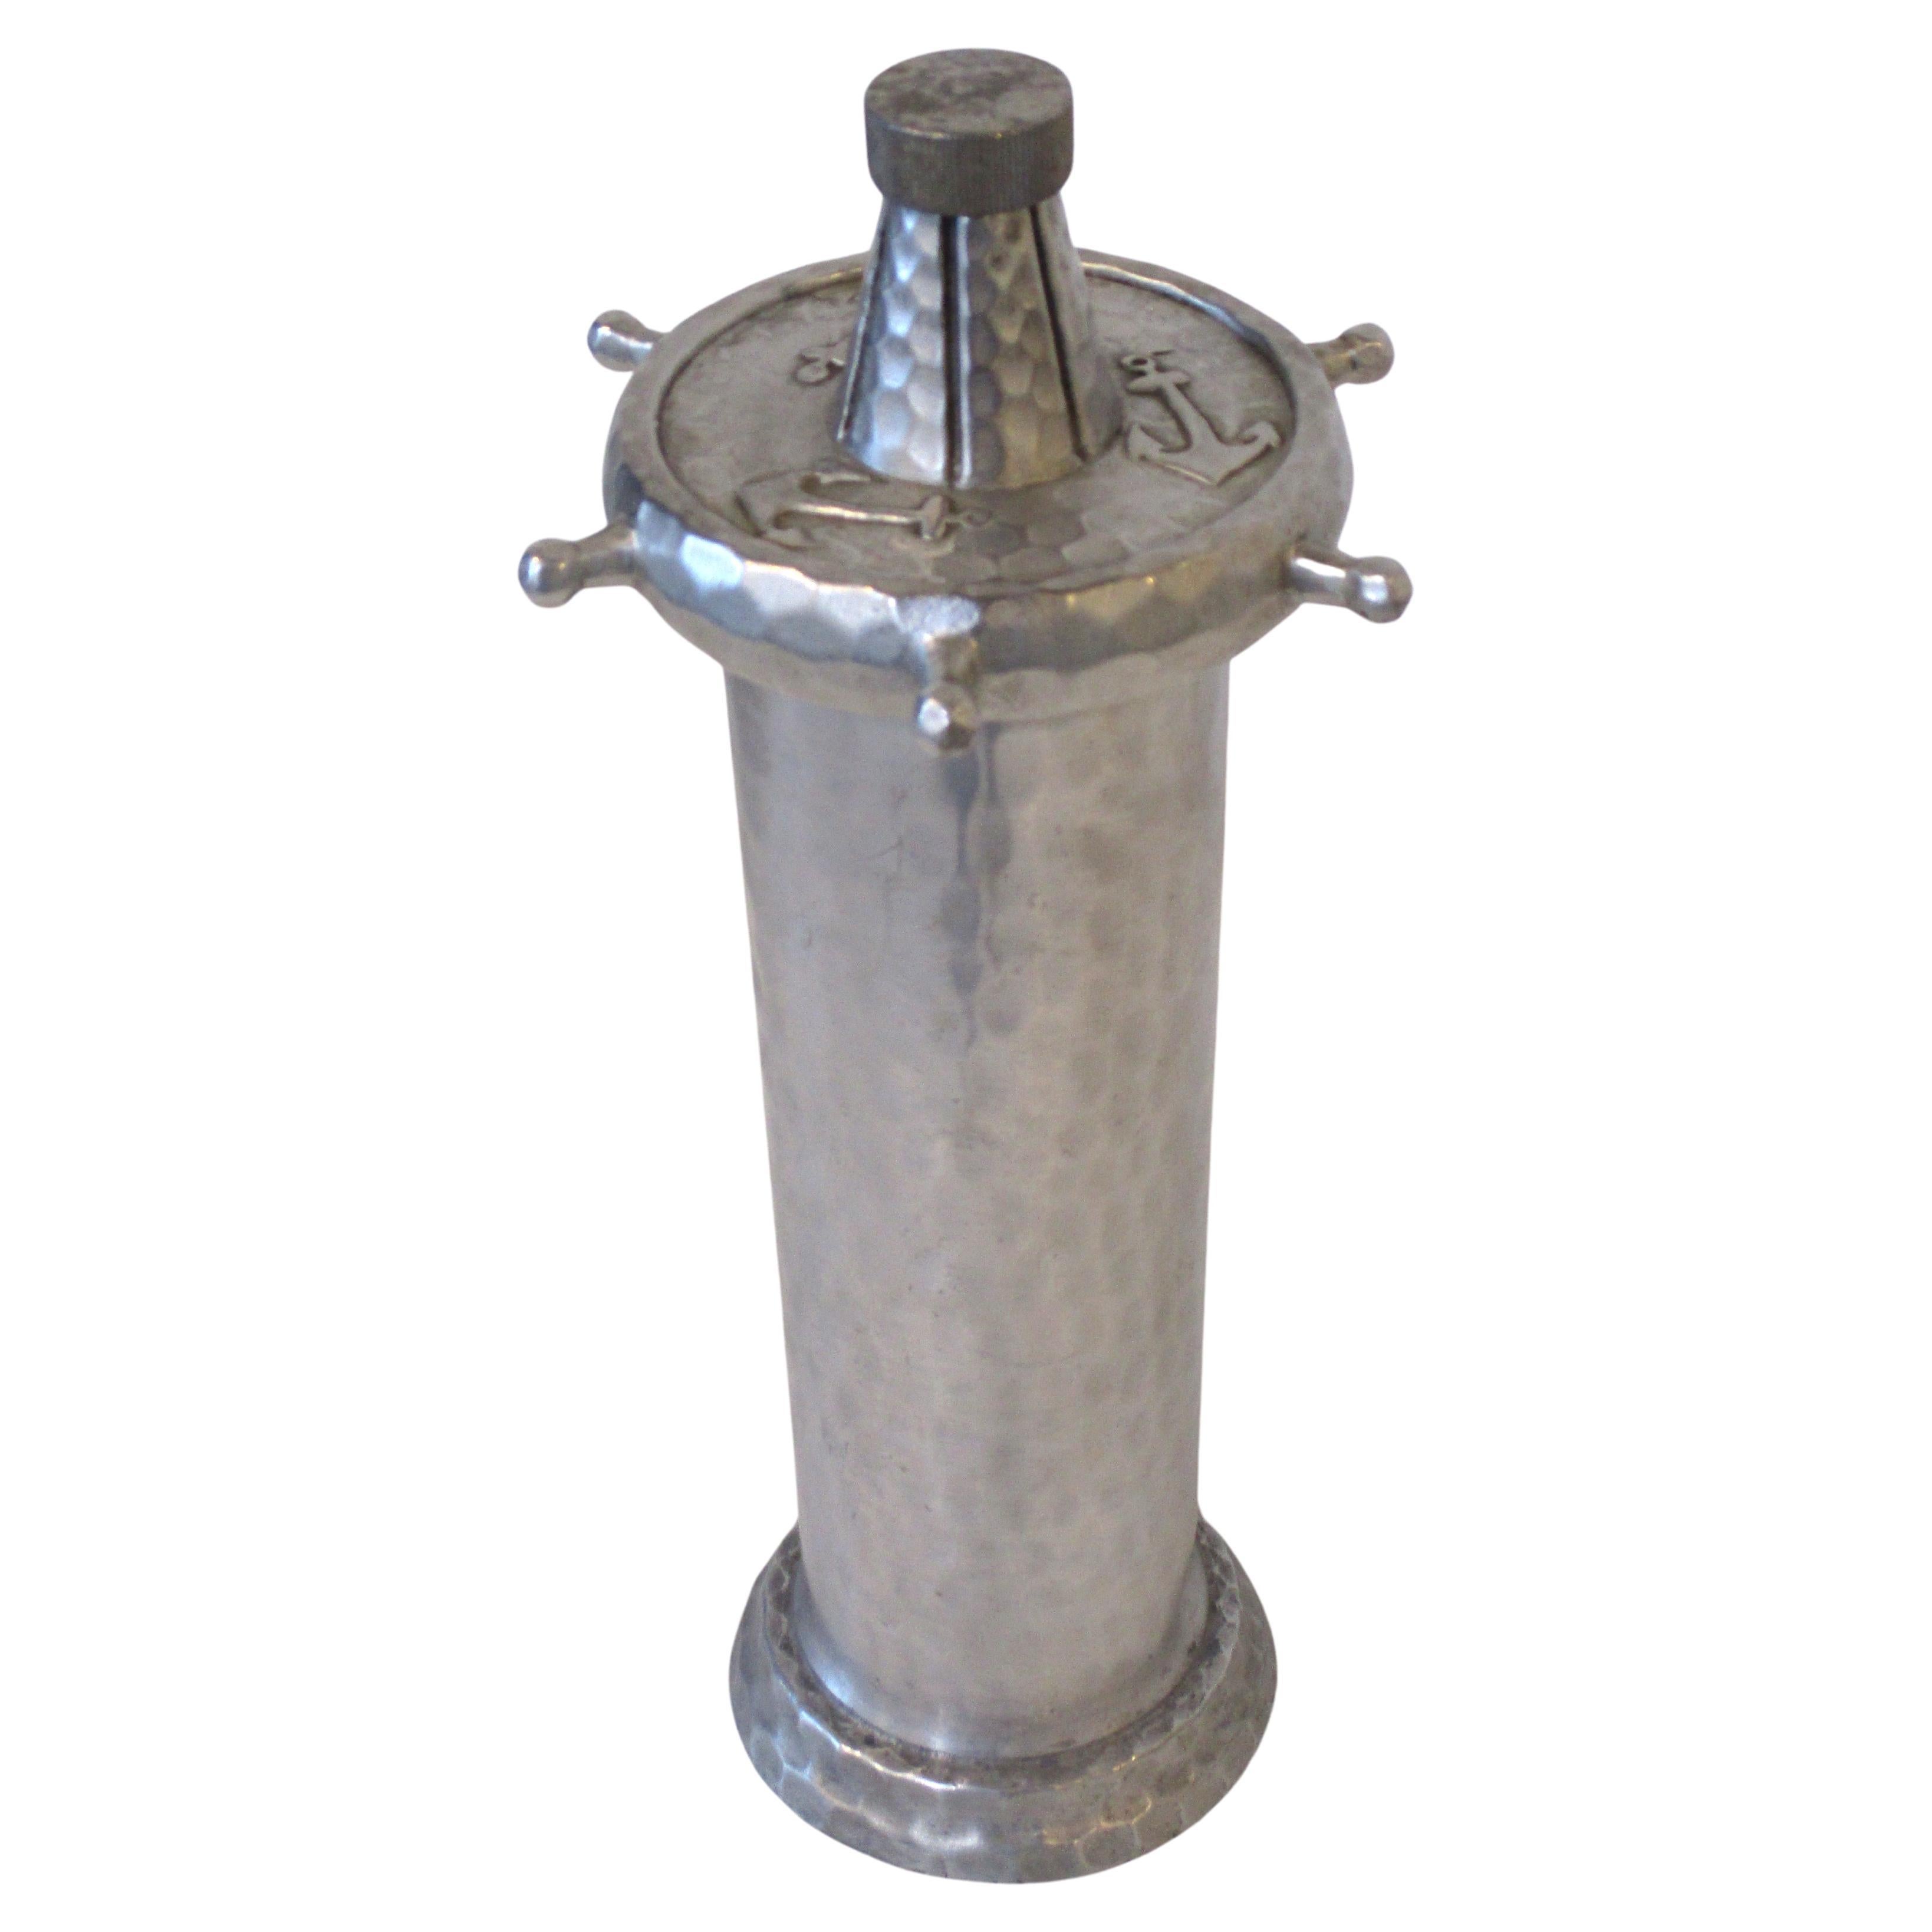 Nautical Hammered Aluminum Cocktail Shaker by Everlast